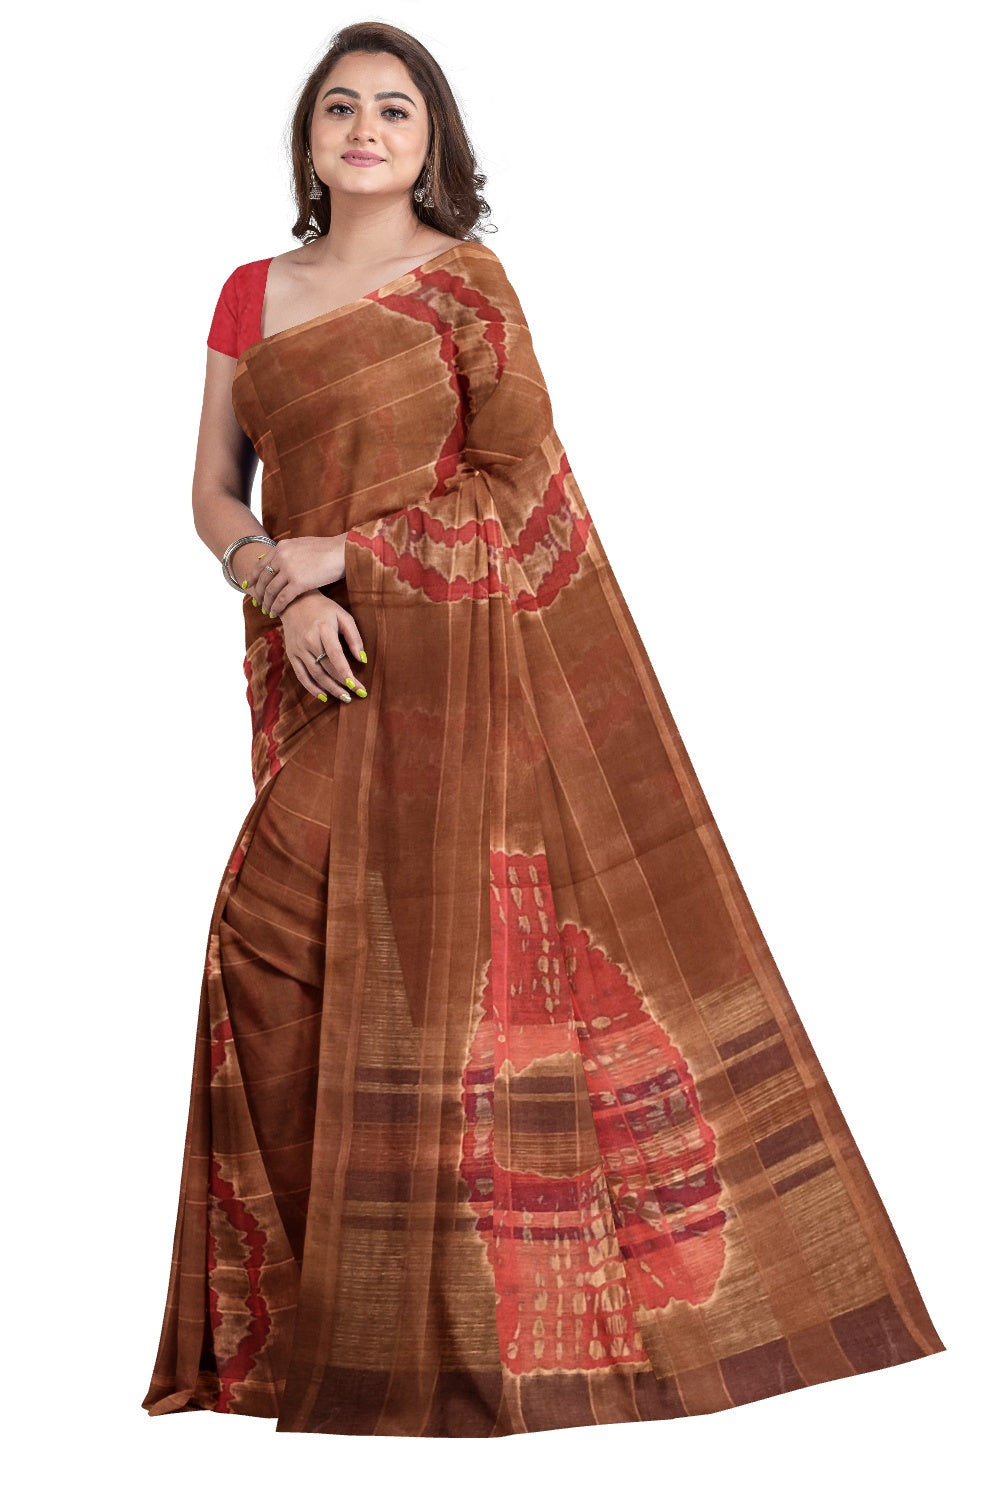 Southloom Cotton Dark Orange Red Saree with Red Blouse Piece